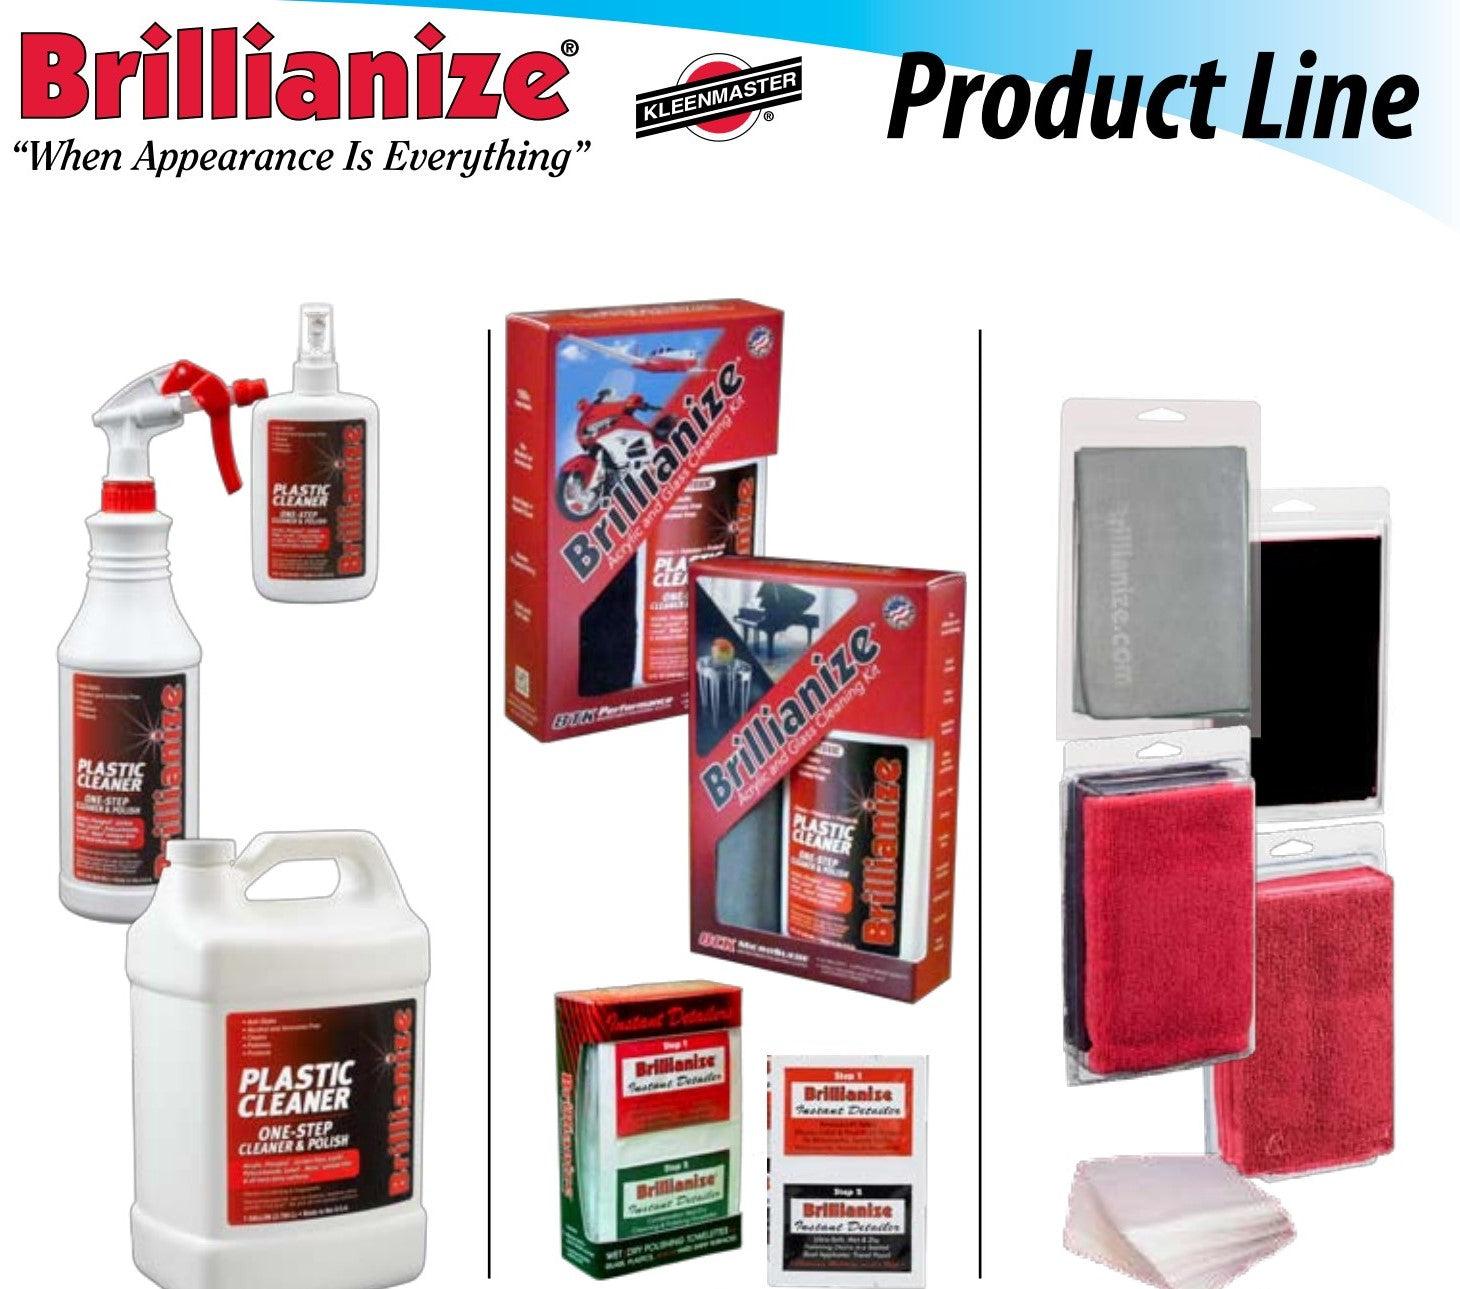 Brillianize® 32 oz. Acrylic & Glass Cleaner & Polish, Cleaners, Cleaning  Supplies & Equipment, Exhibit & Display